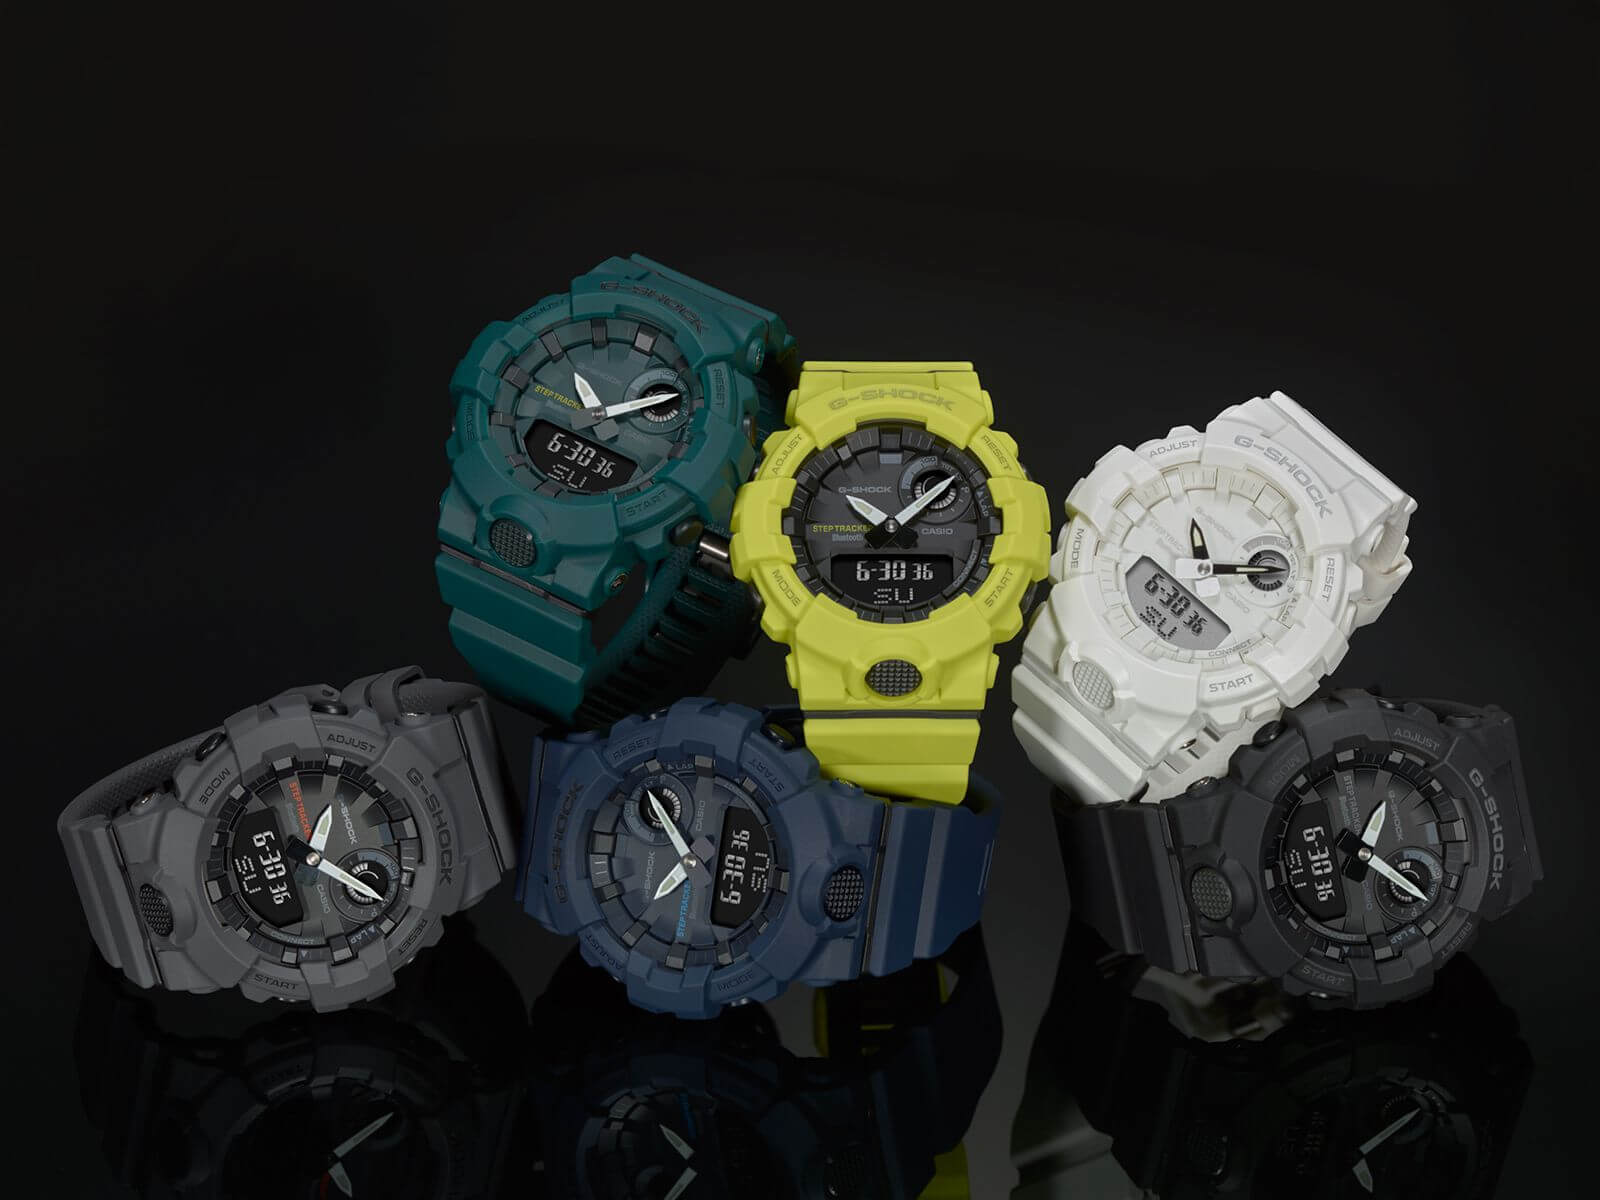 G Shock G Squad Gba 800 With Step Tracker And Bluetooth G Central G Shock Watch Fan Blog